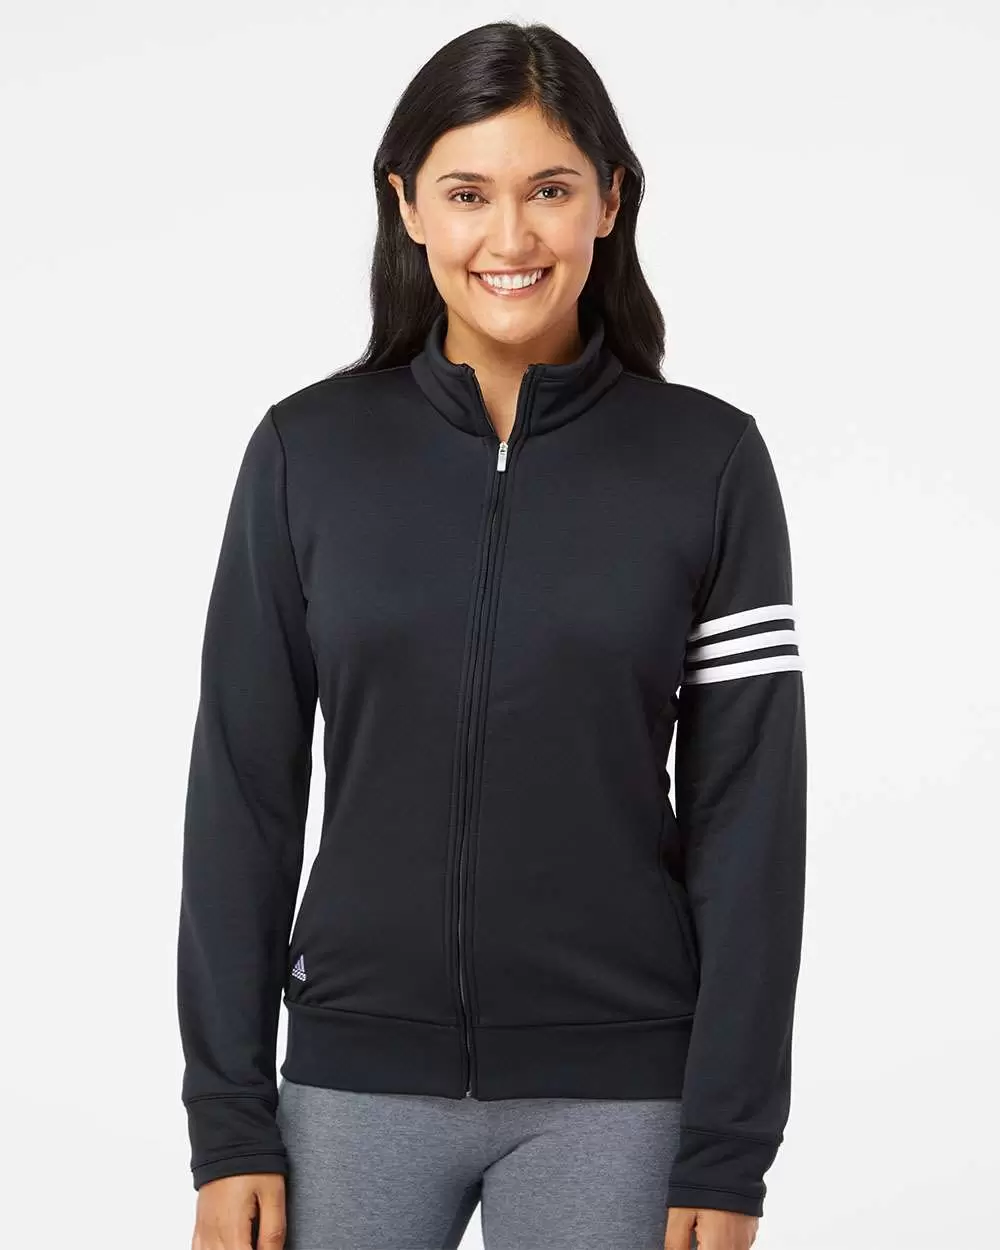 A191 adidas - Ladies' ClimaLite® 3-Stripes French Terry Full-Zip Jacket -  From $36.17